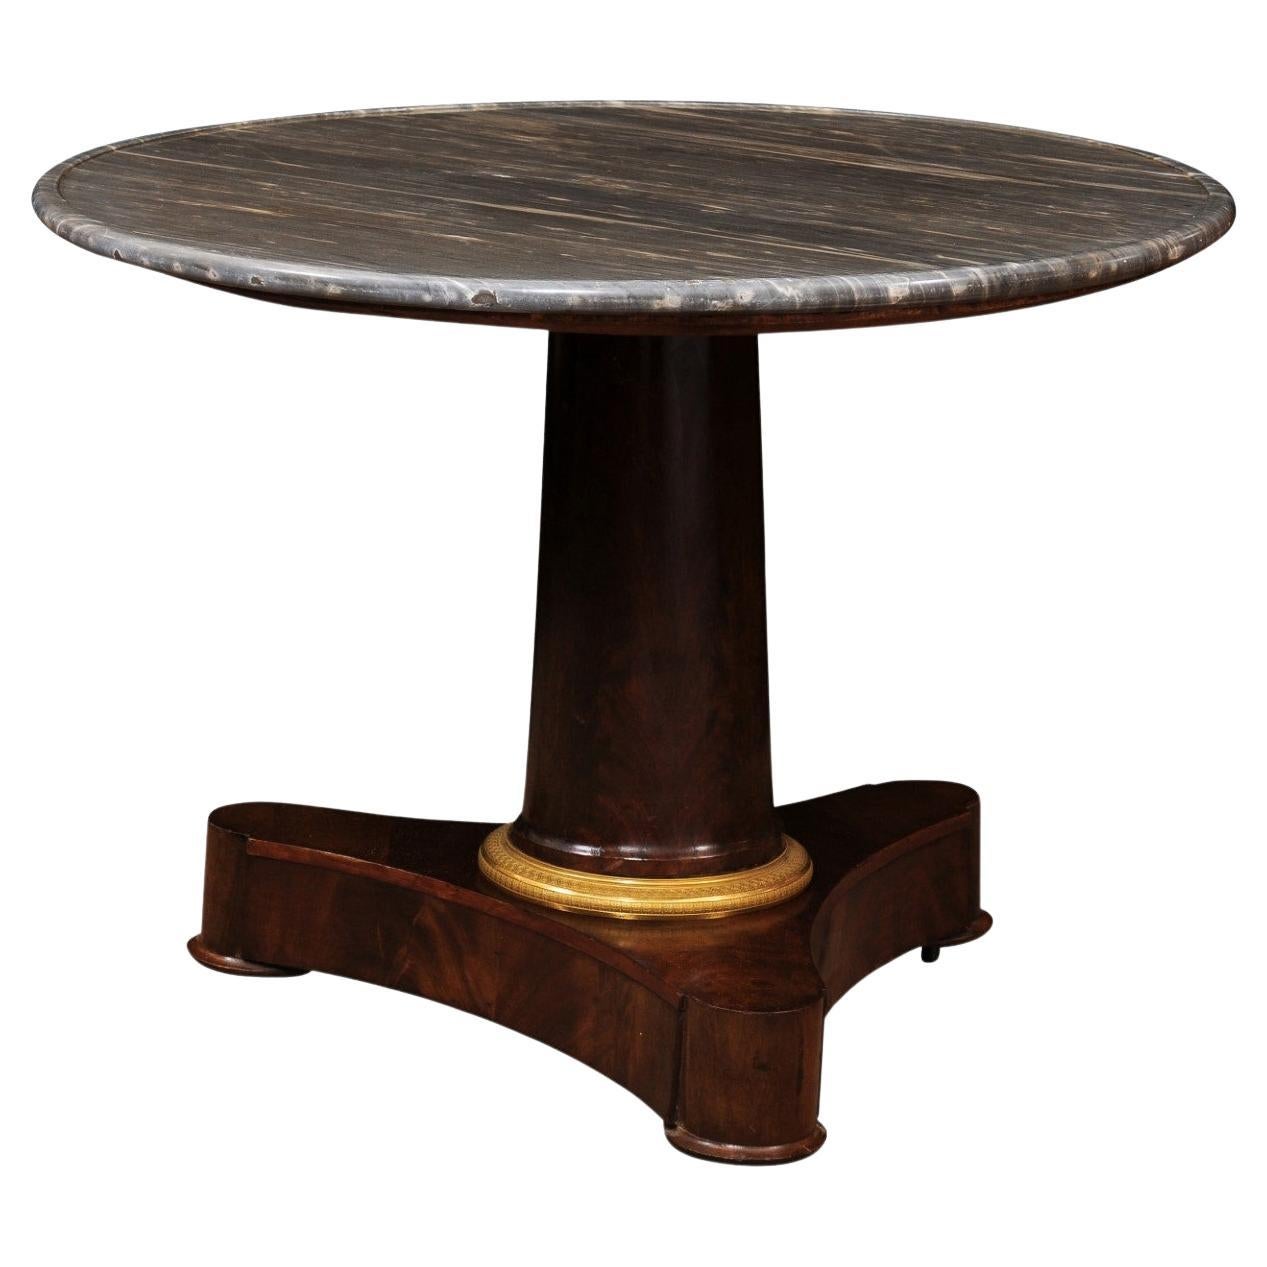  Early 19th C French Empire Walnut Center Table, Grey Marble Top & Ormolu Detail For Sale